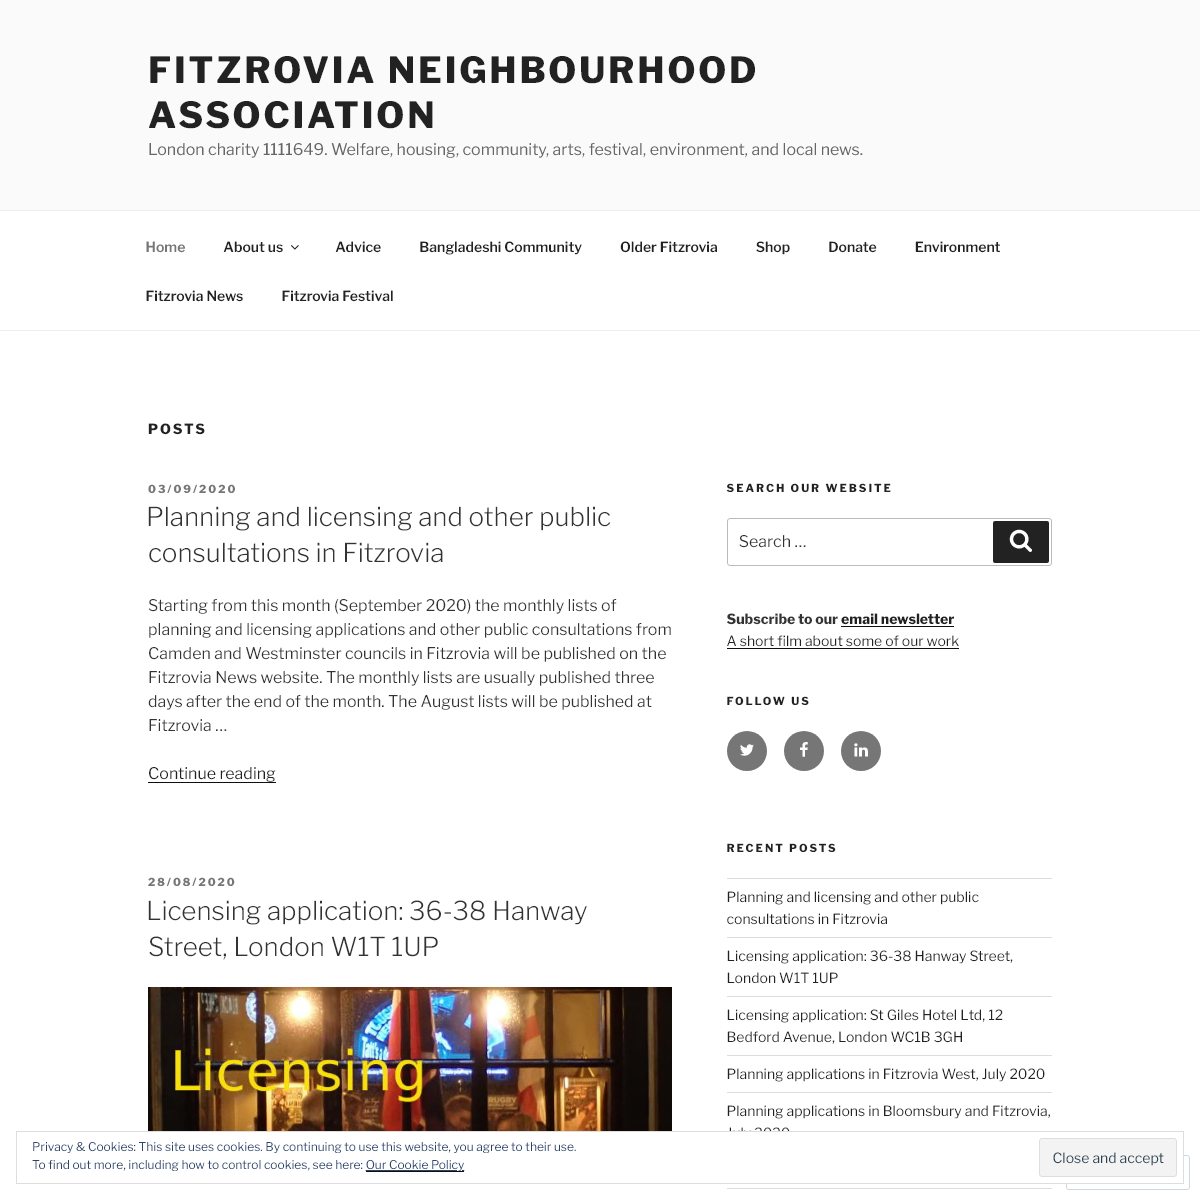 A complete backup of fitzrovia.org.uk